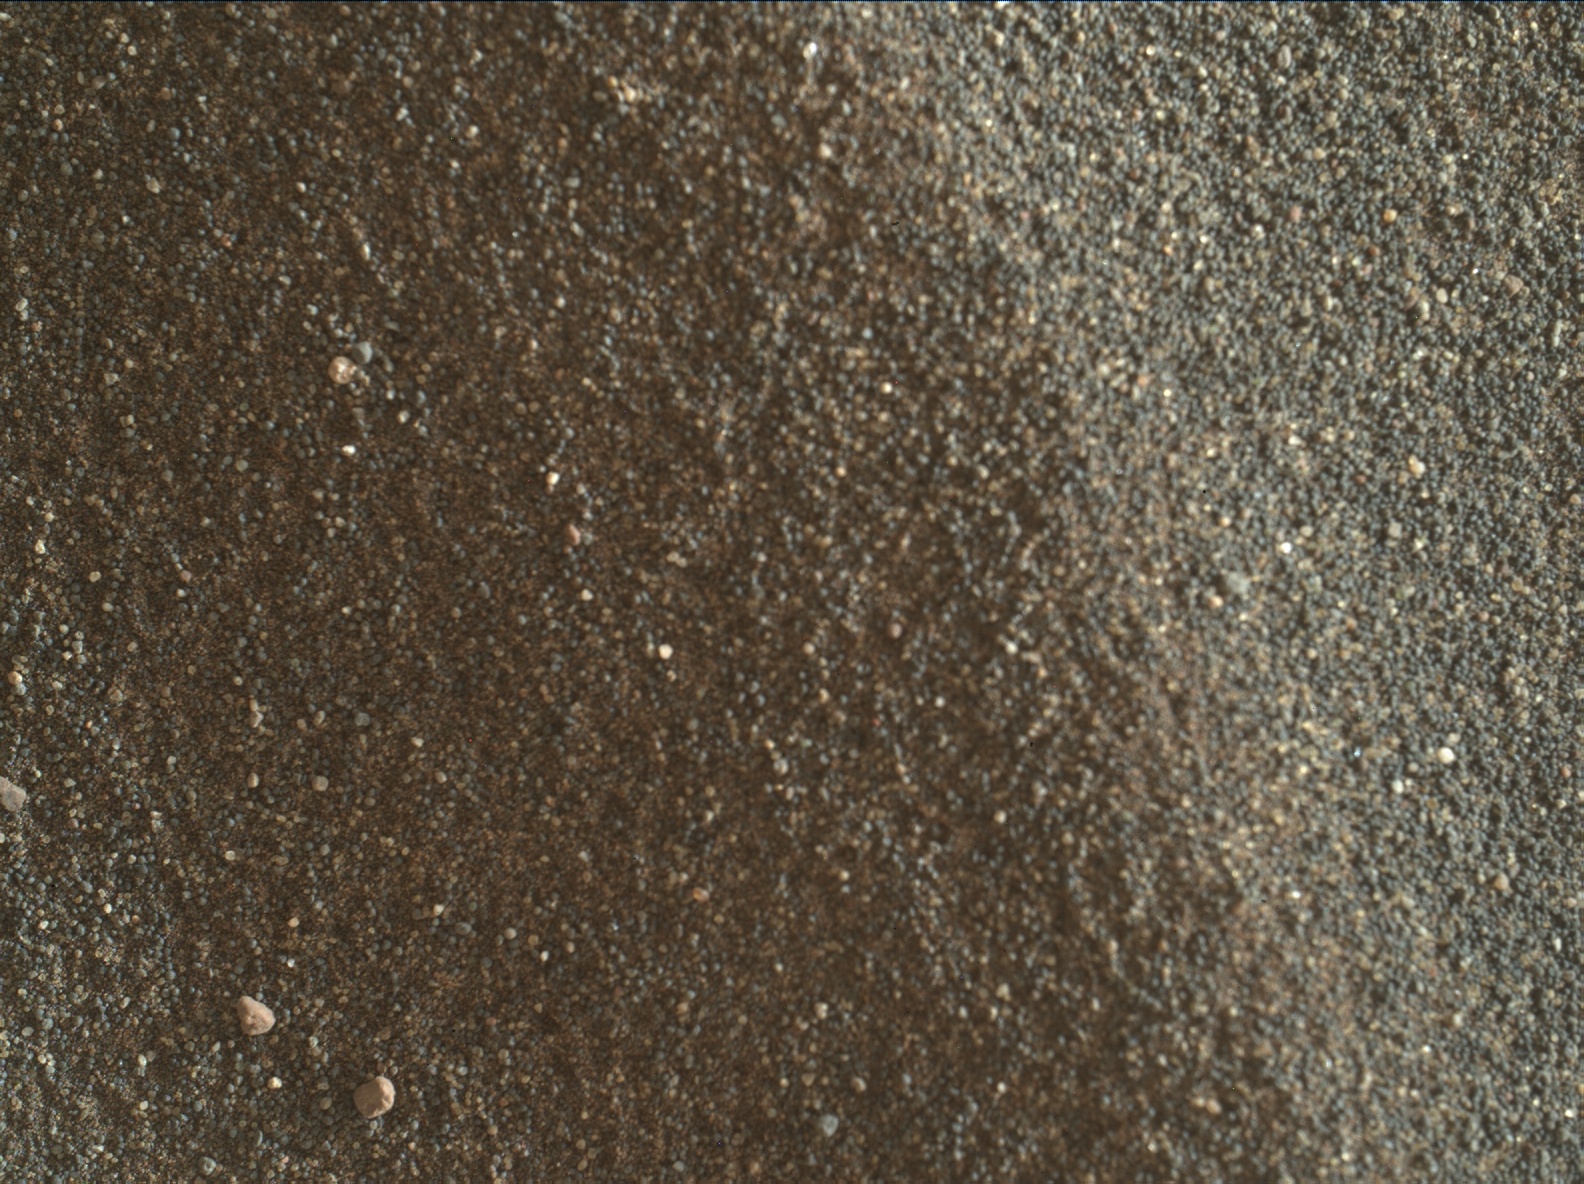 Nasa's Mars rover Curiosity acquired this image using its Mars Hand Lens Imager (MAHLI) on Sol 2409